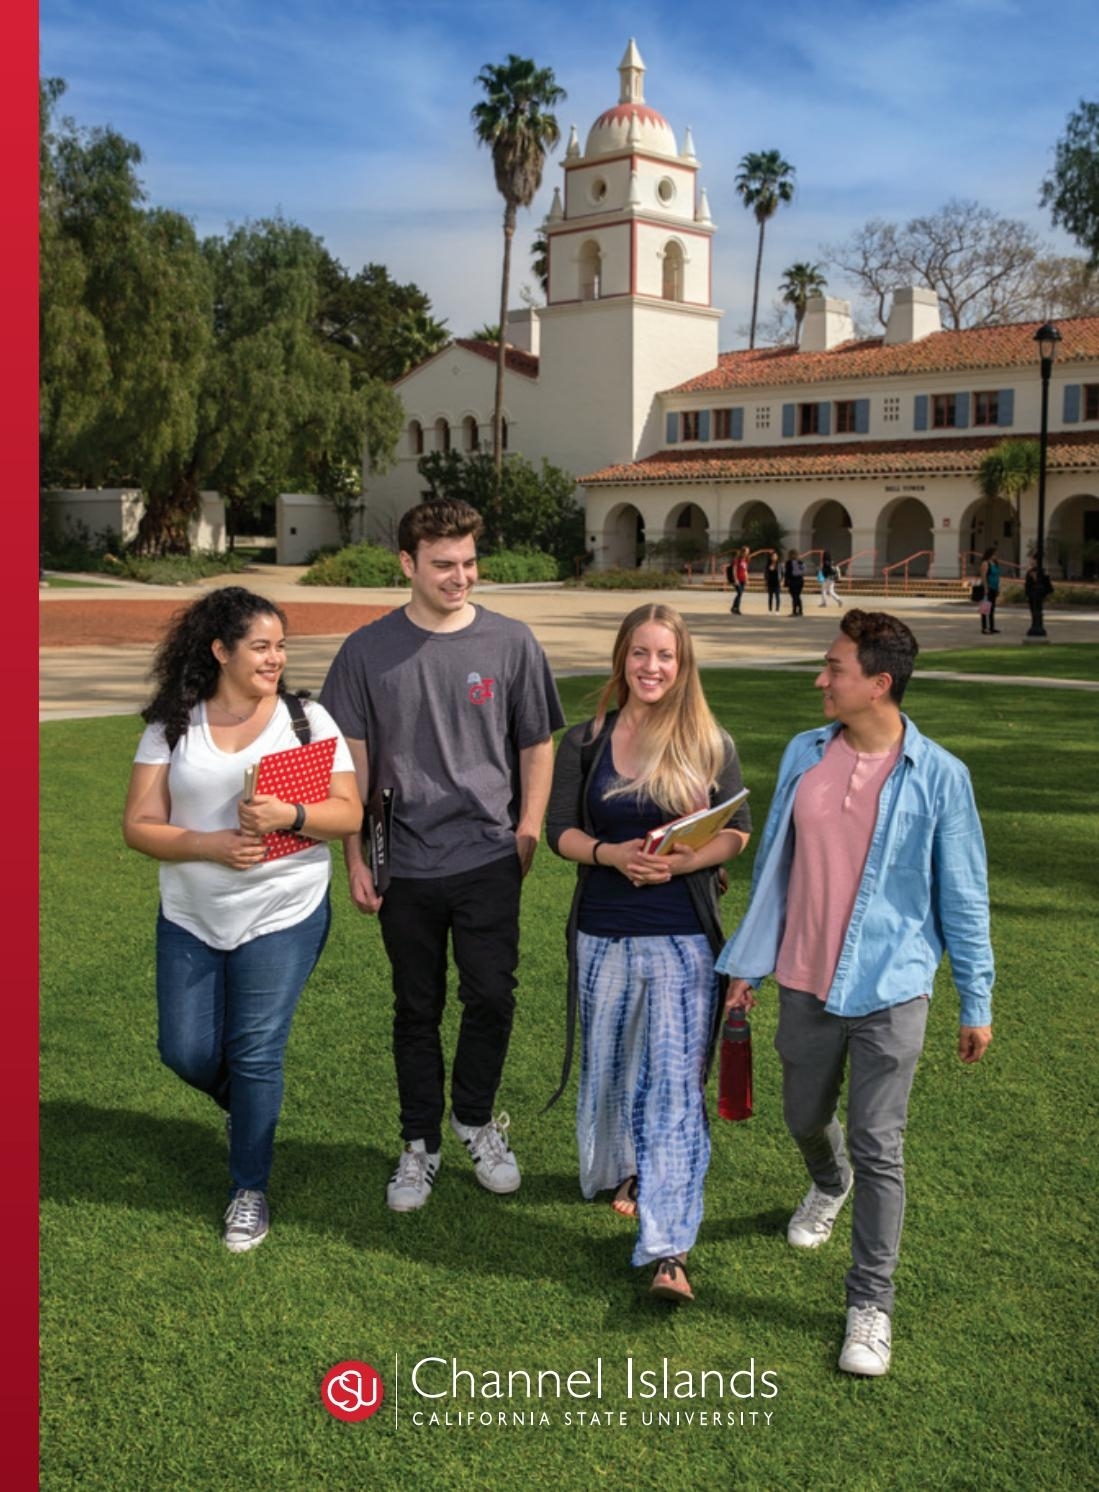 2017-18 Csu Channel Islands Viewbookcsu Channel Islands - Issuu for Yearly Cost For Attending At Csuci